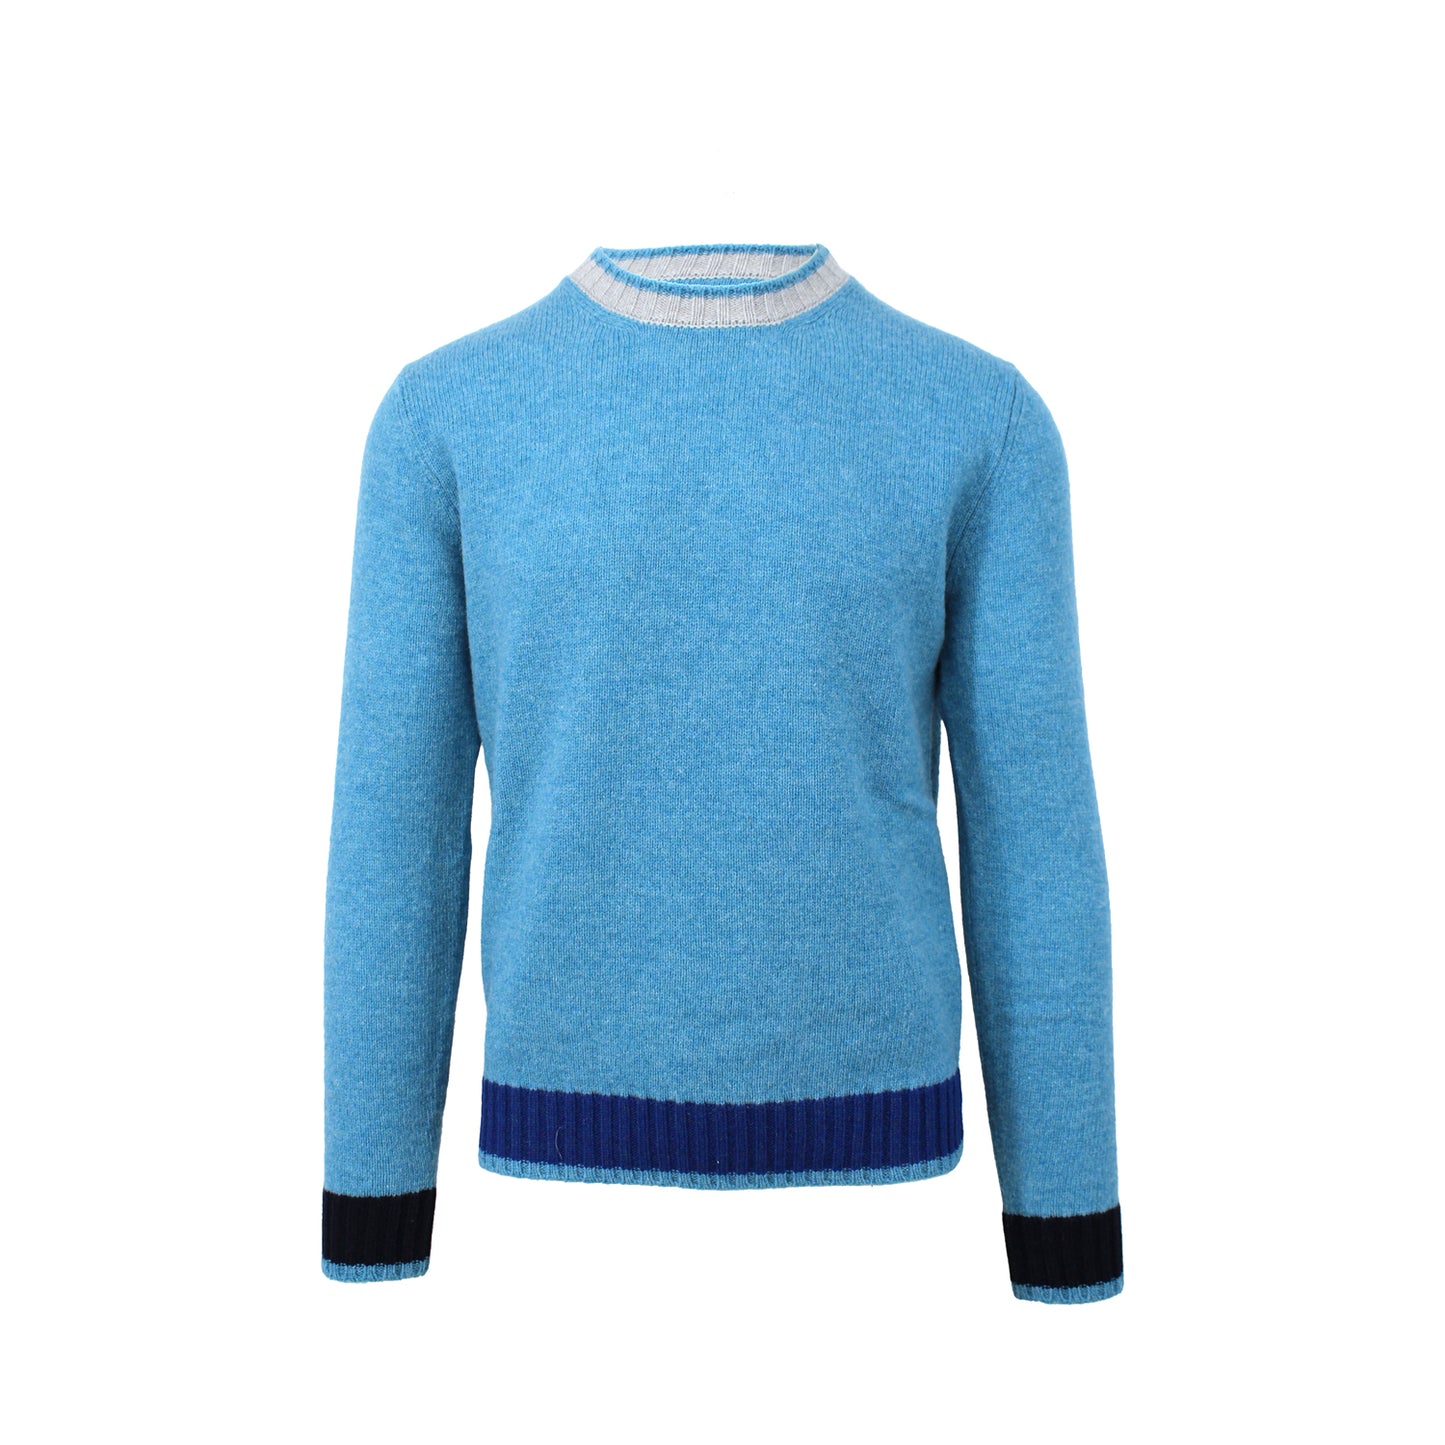 Teal Crewneck Sweater with Contrast Accents